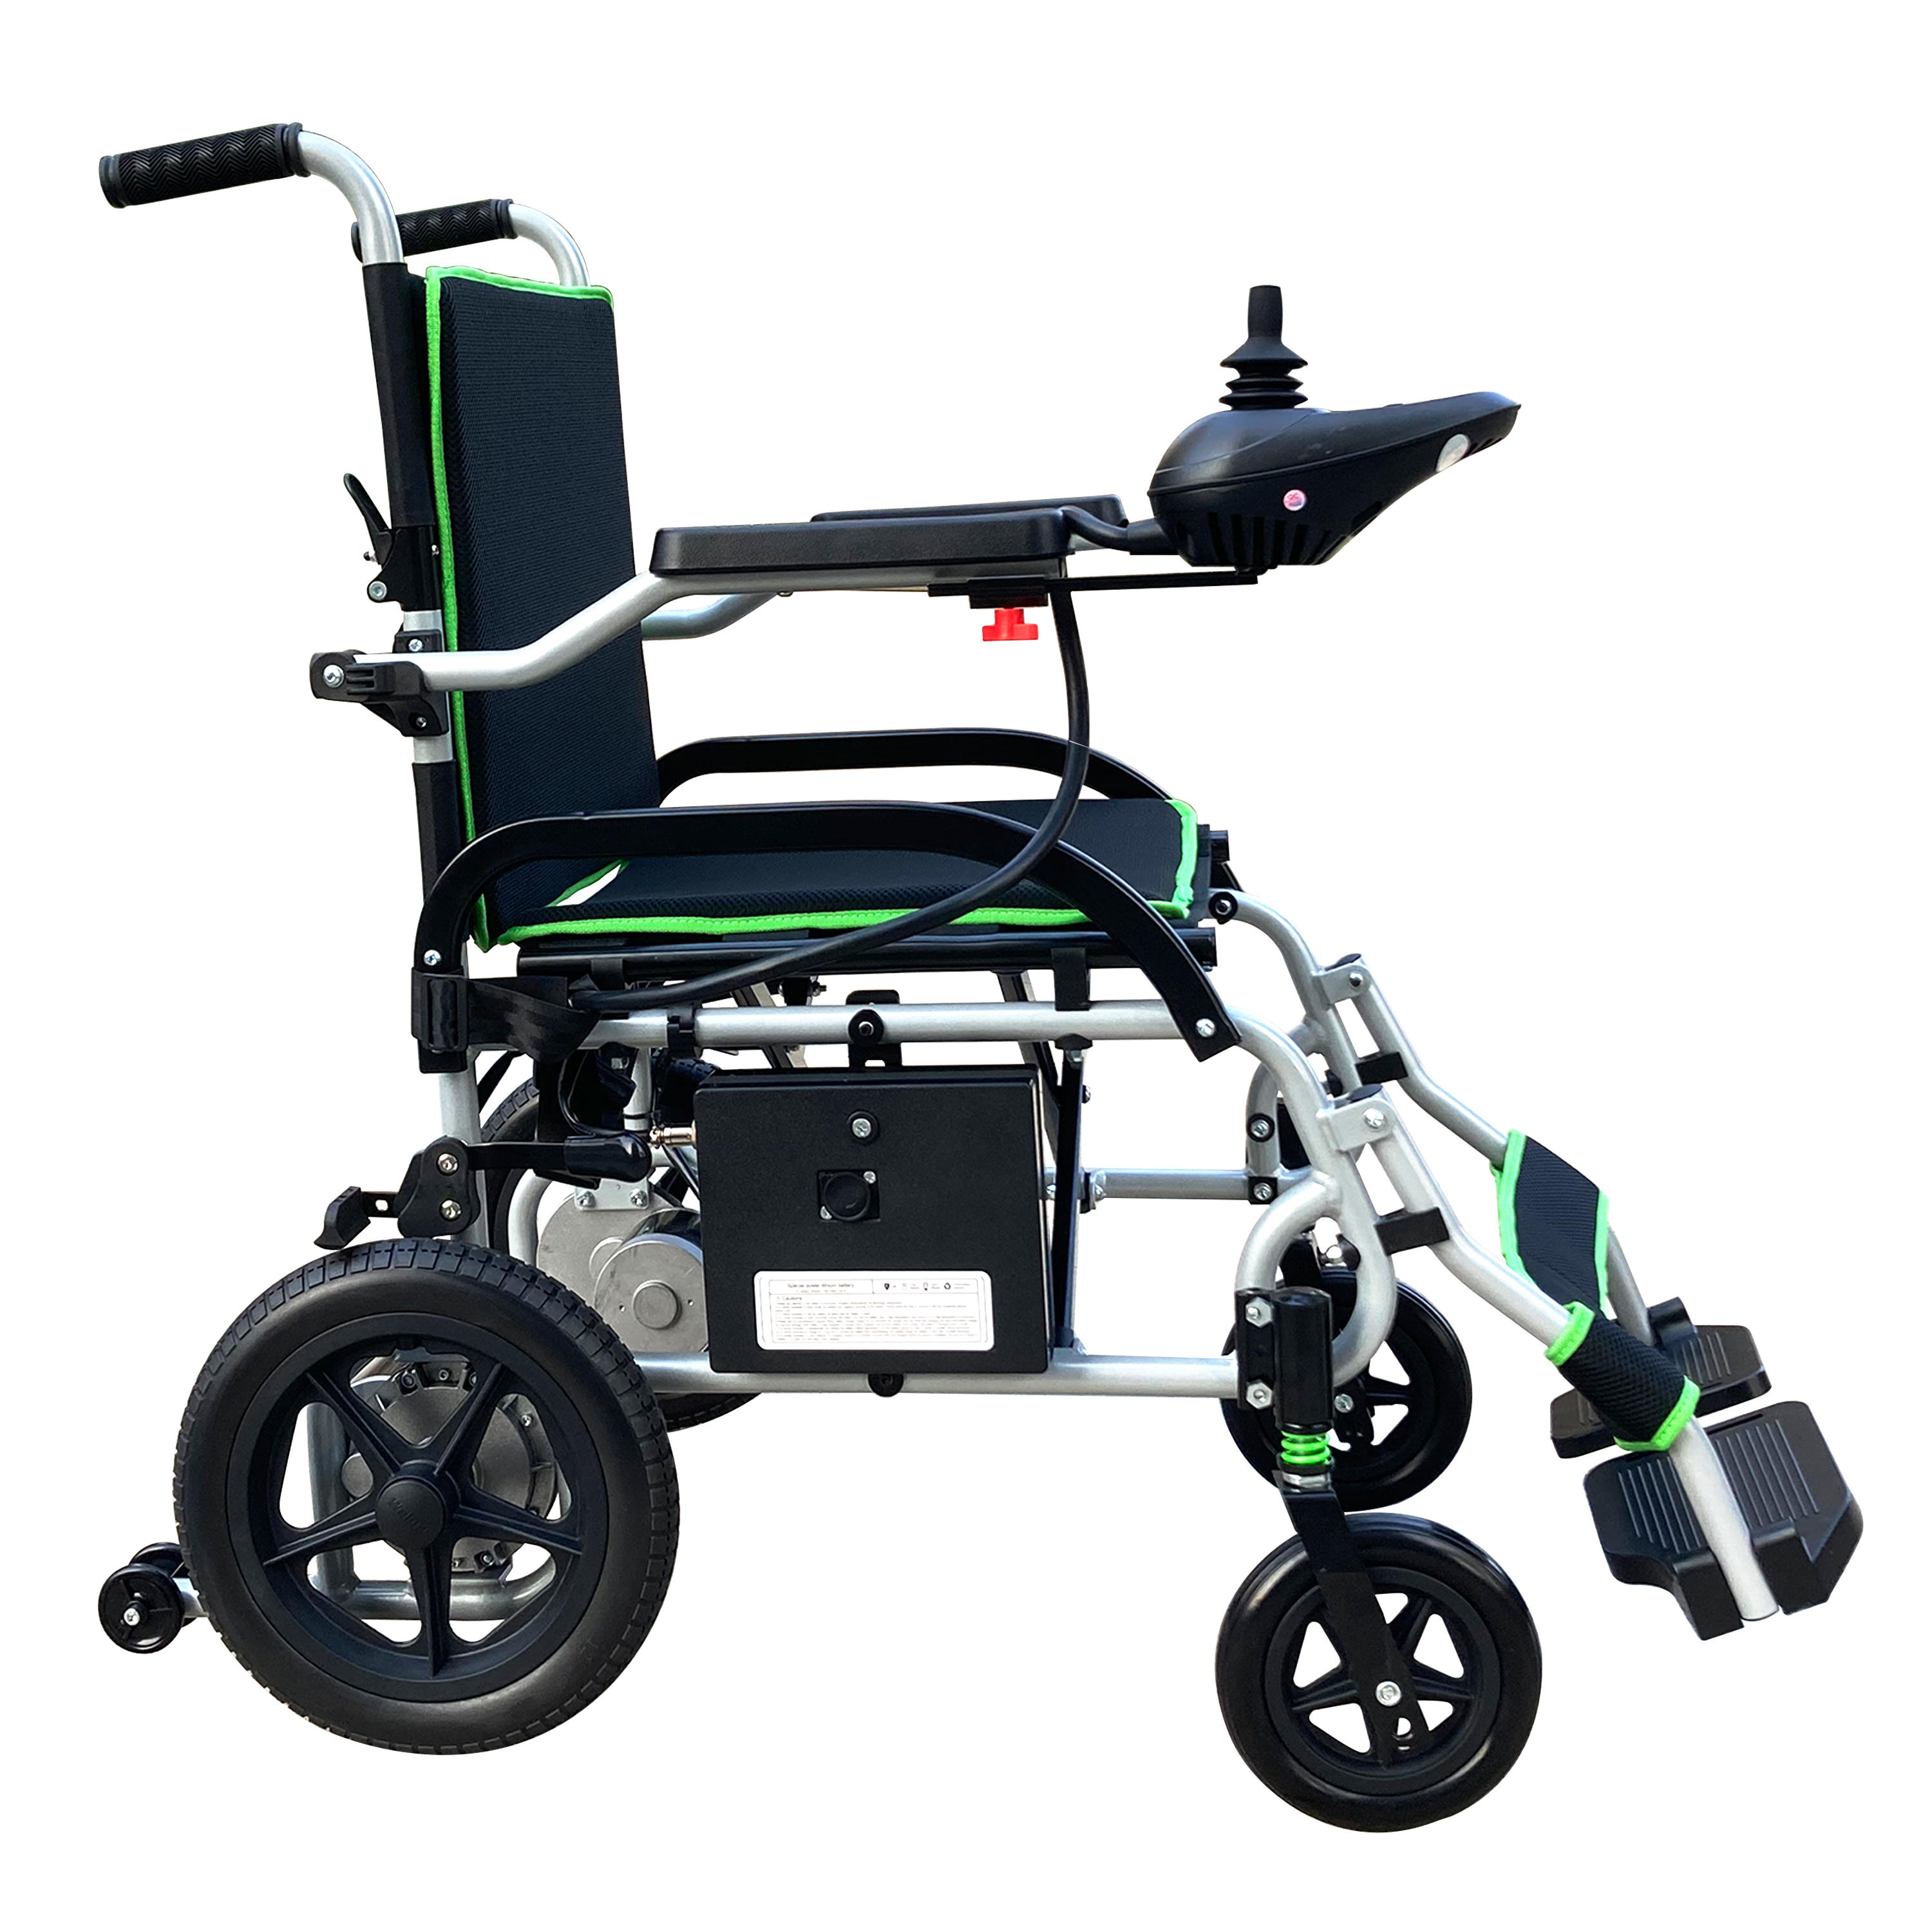 Electric Wheelchair Lightweight Foldable for Adults Seniors, Total Weights 37.5lbs,Weight Capacity 265lbs with Dual Motor Wheelchairs